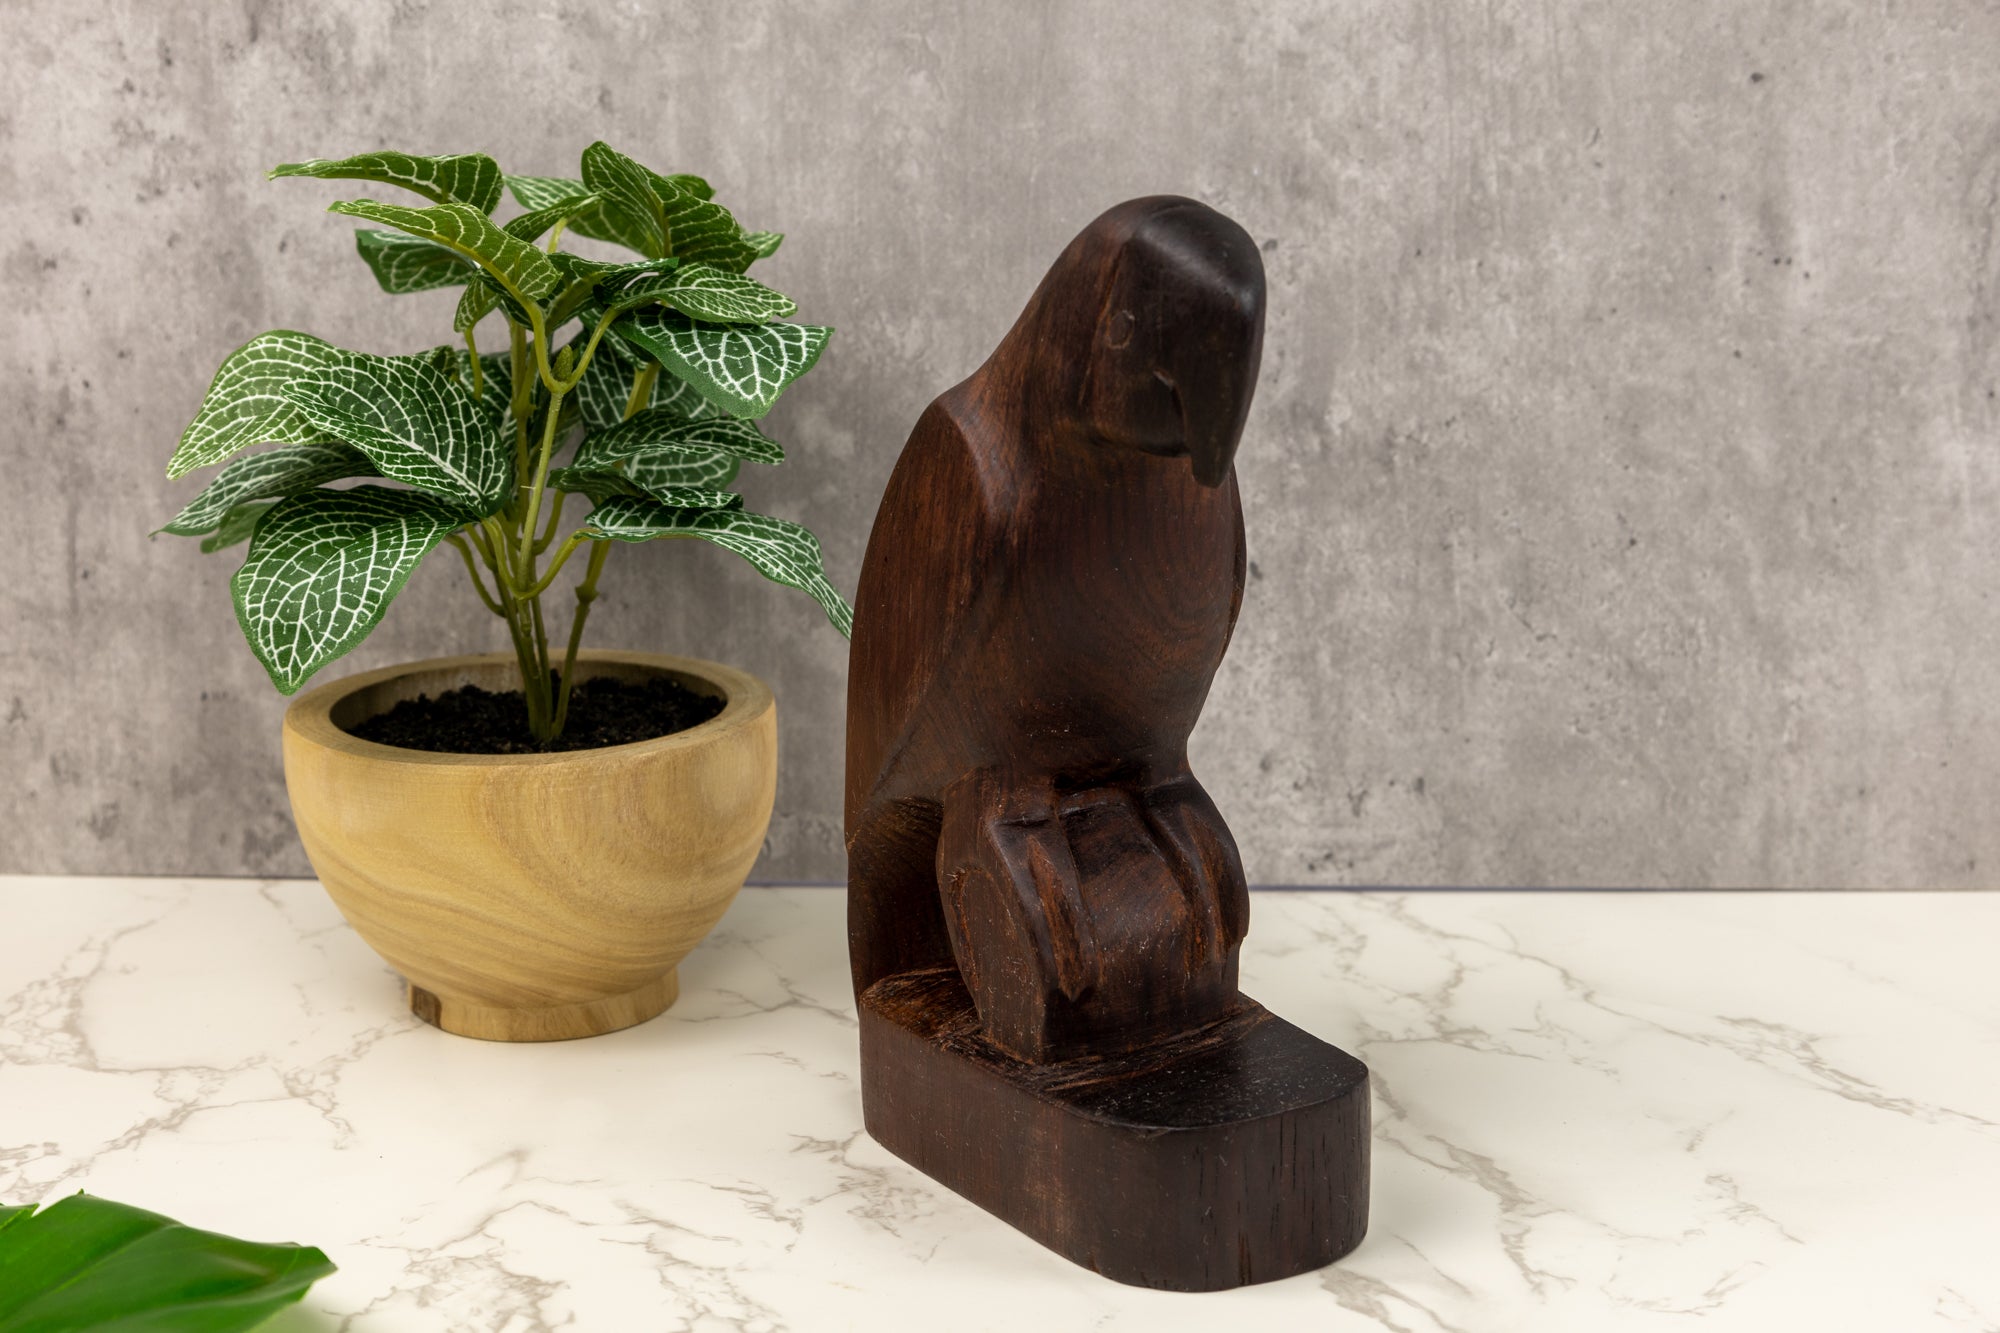 Jungle Parrot Figurine, Wood Carving